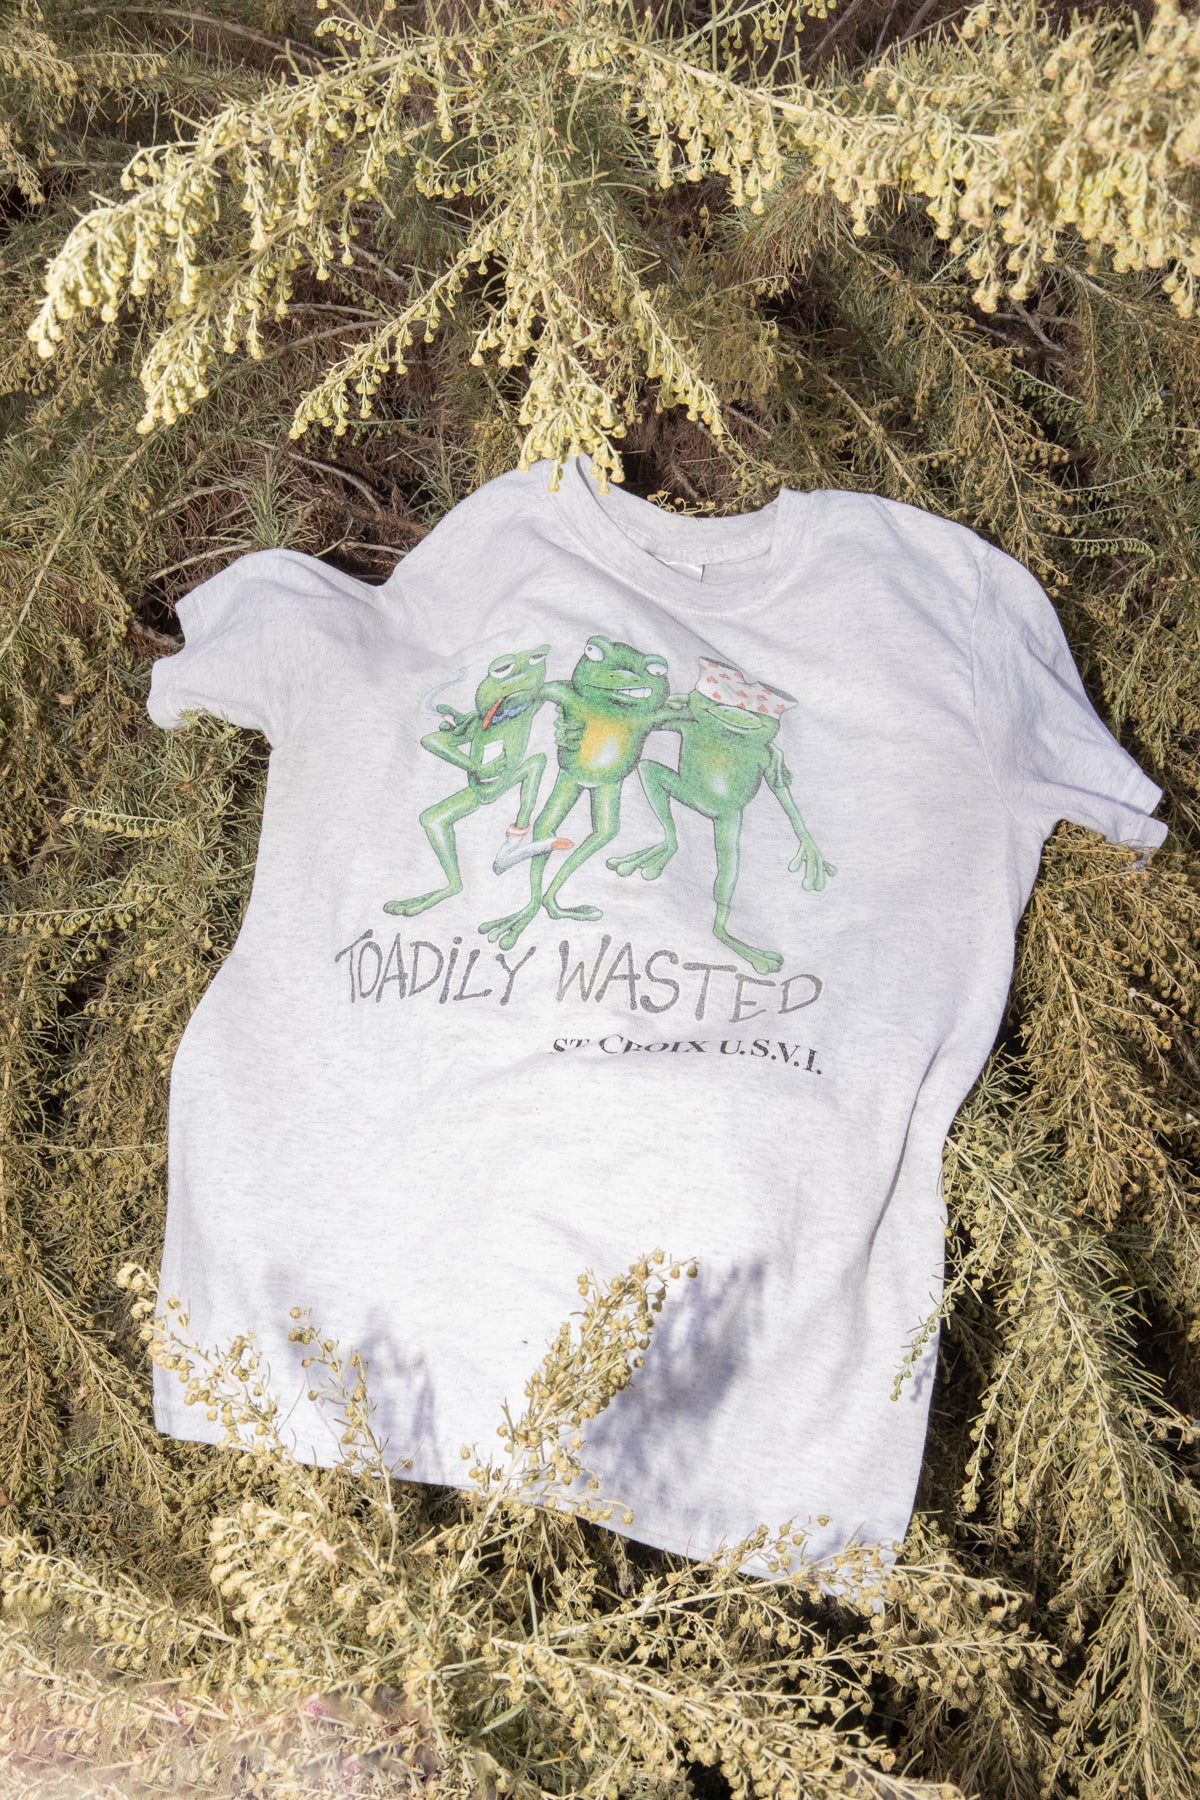 PREMIUM VTG T-SHIRT TOADILY WASTED